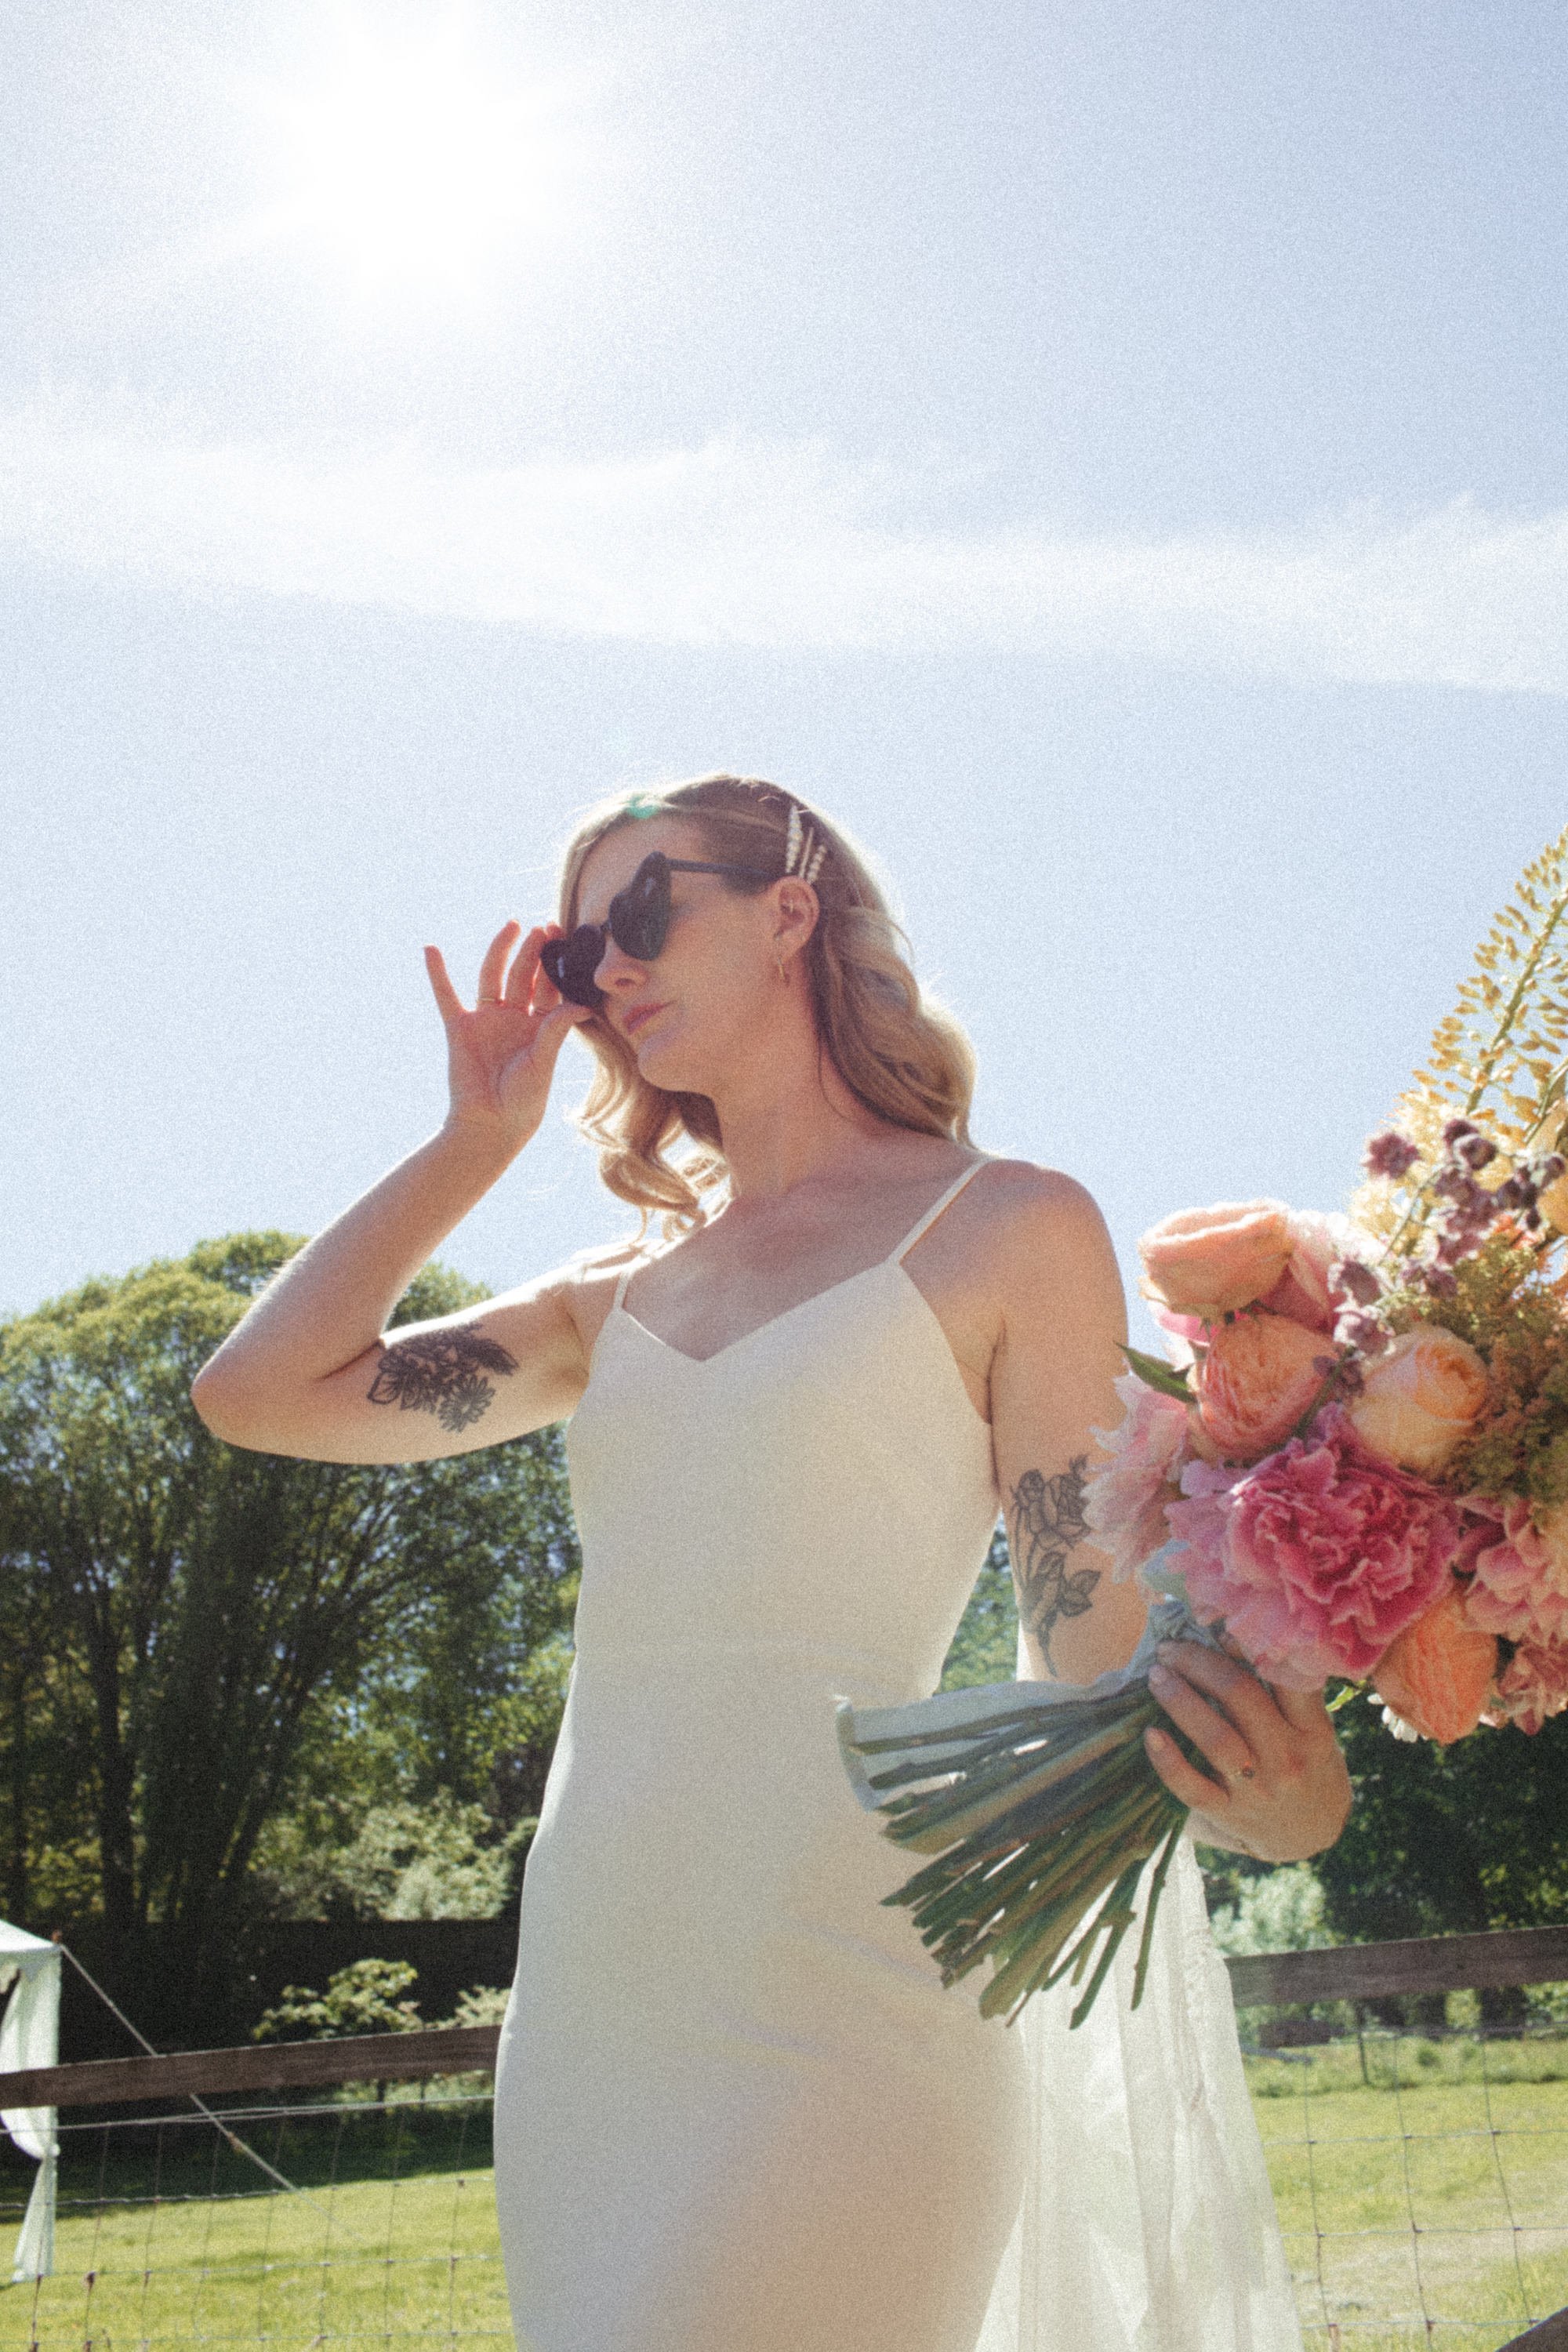 Beautiful bride Sharon wore the Victor wedding dress by Halfpenny London